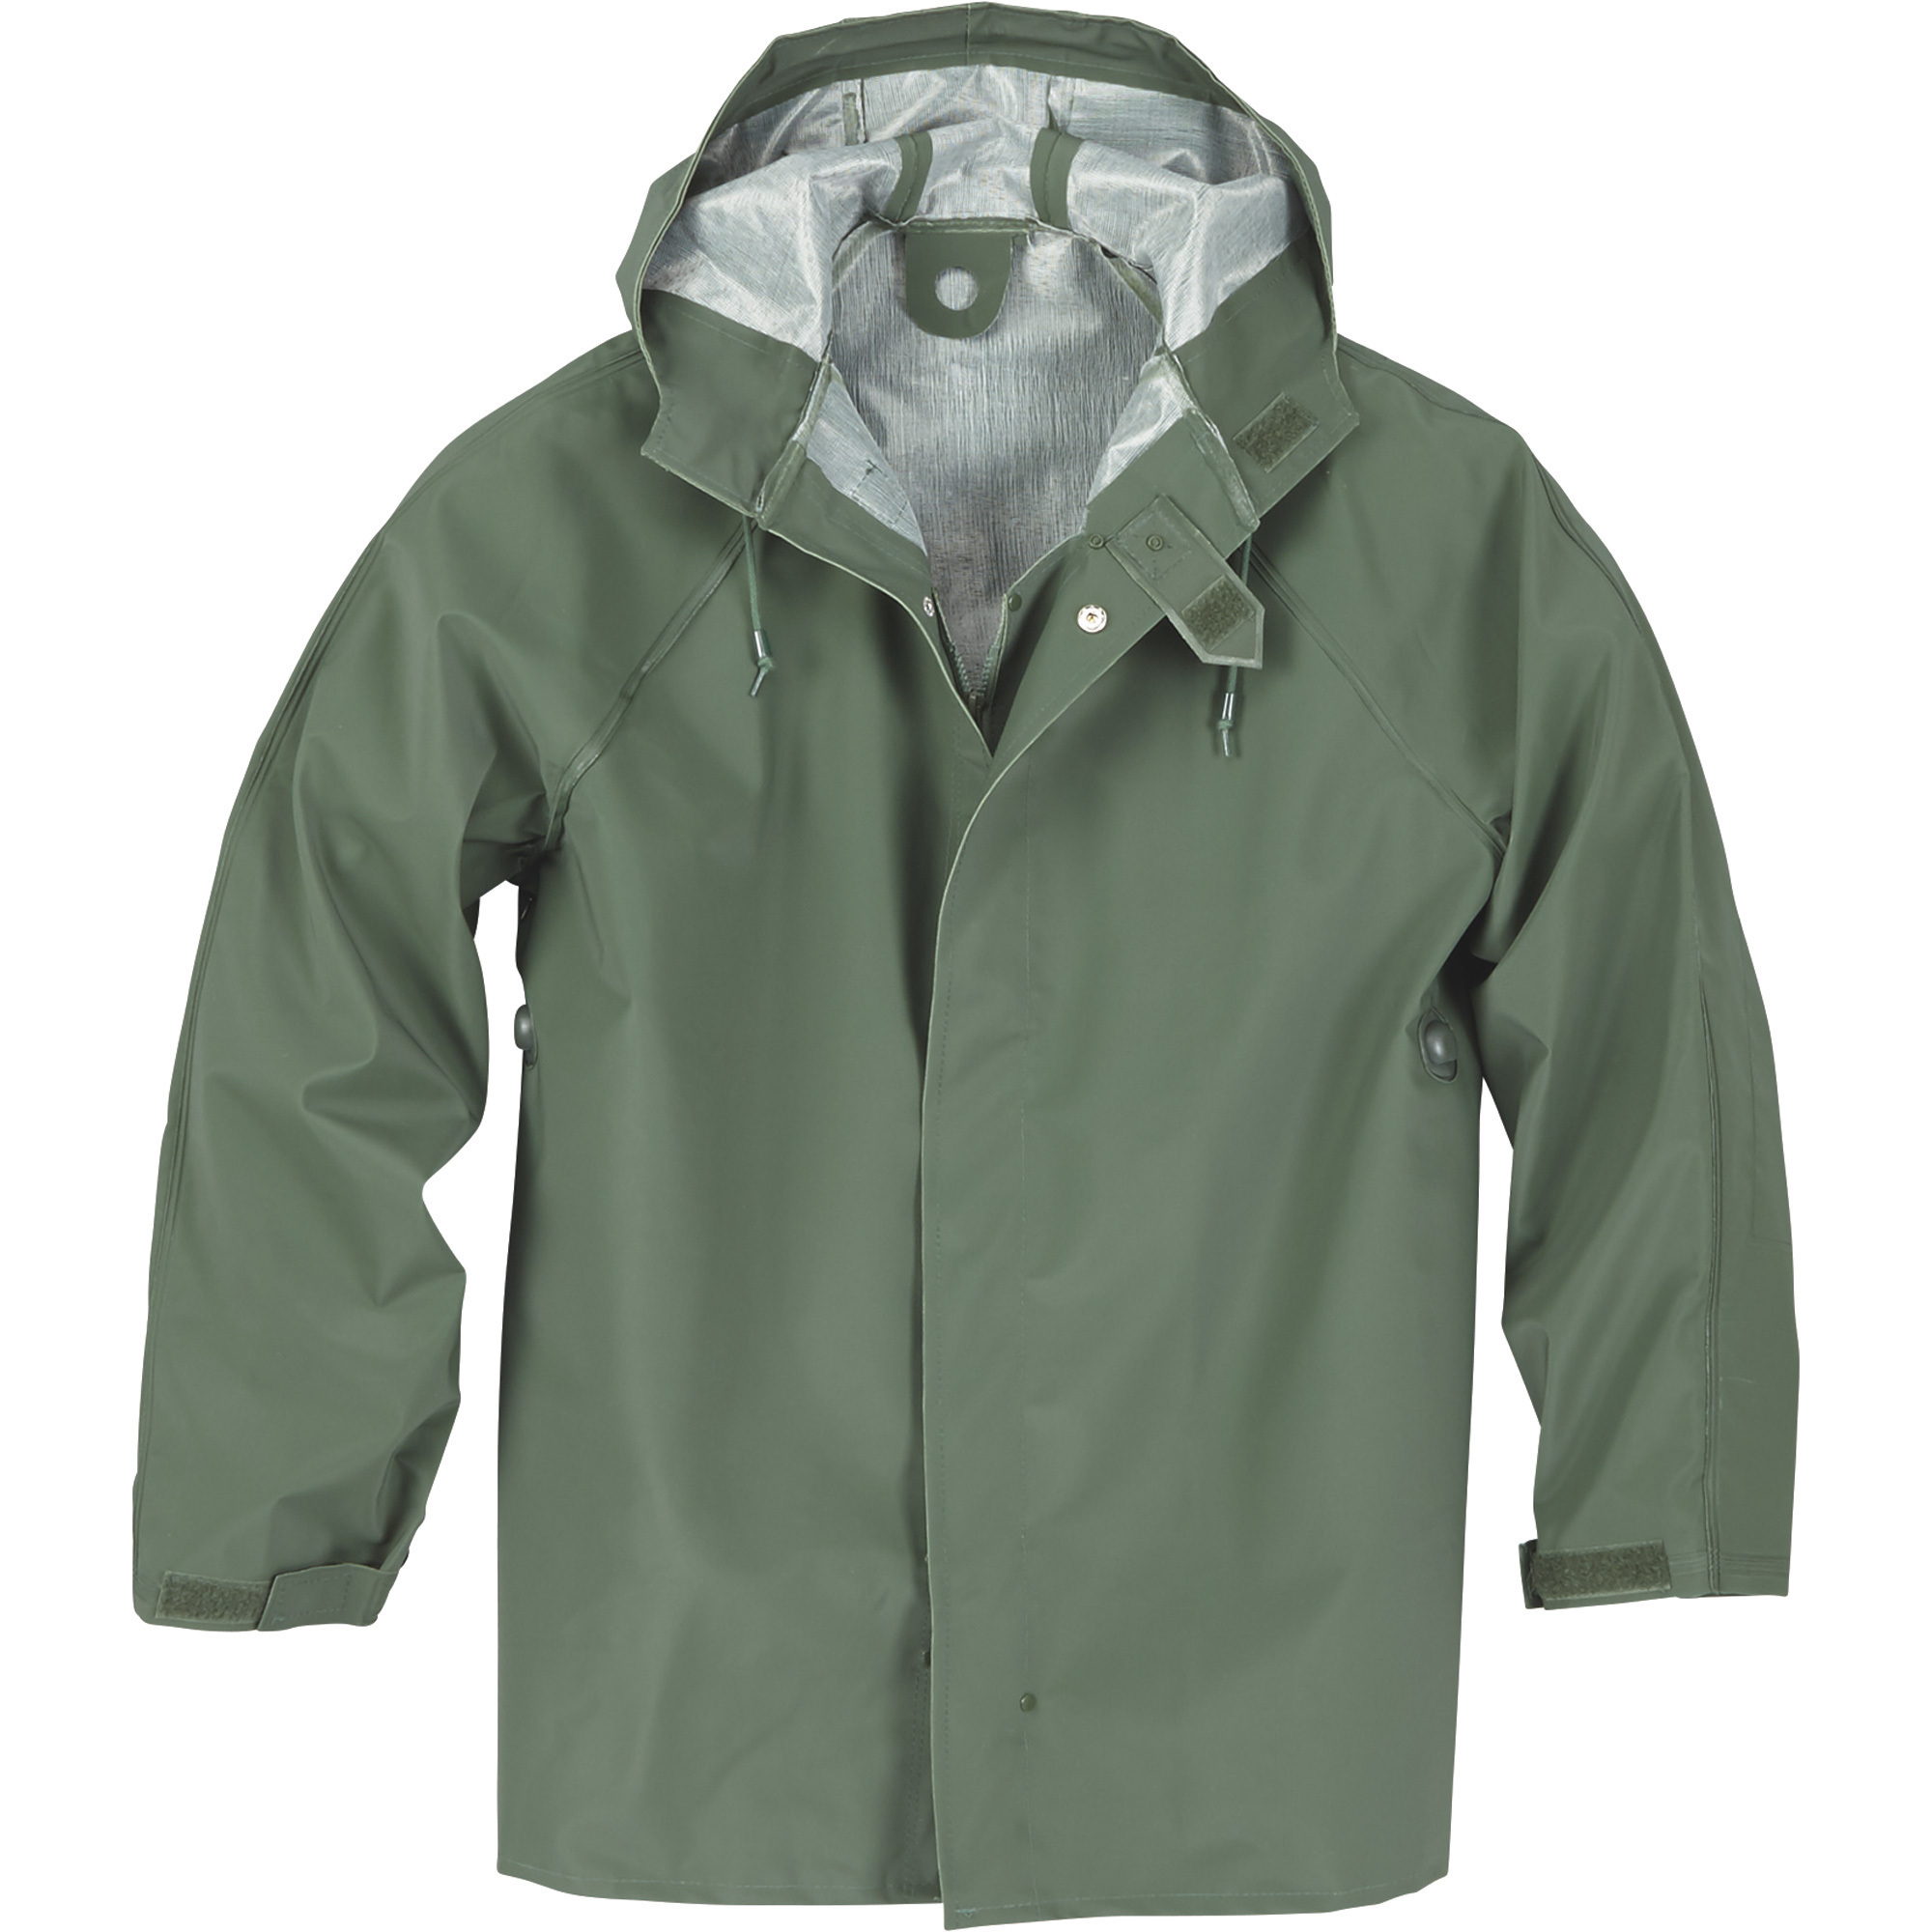 West Chester Men's Protective Gear 50mm PVC/Poly Rain Parka - Olive Green, Large, Model 44850/L